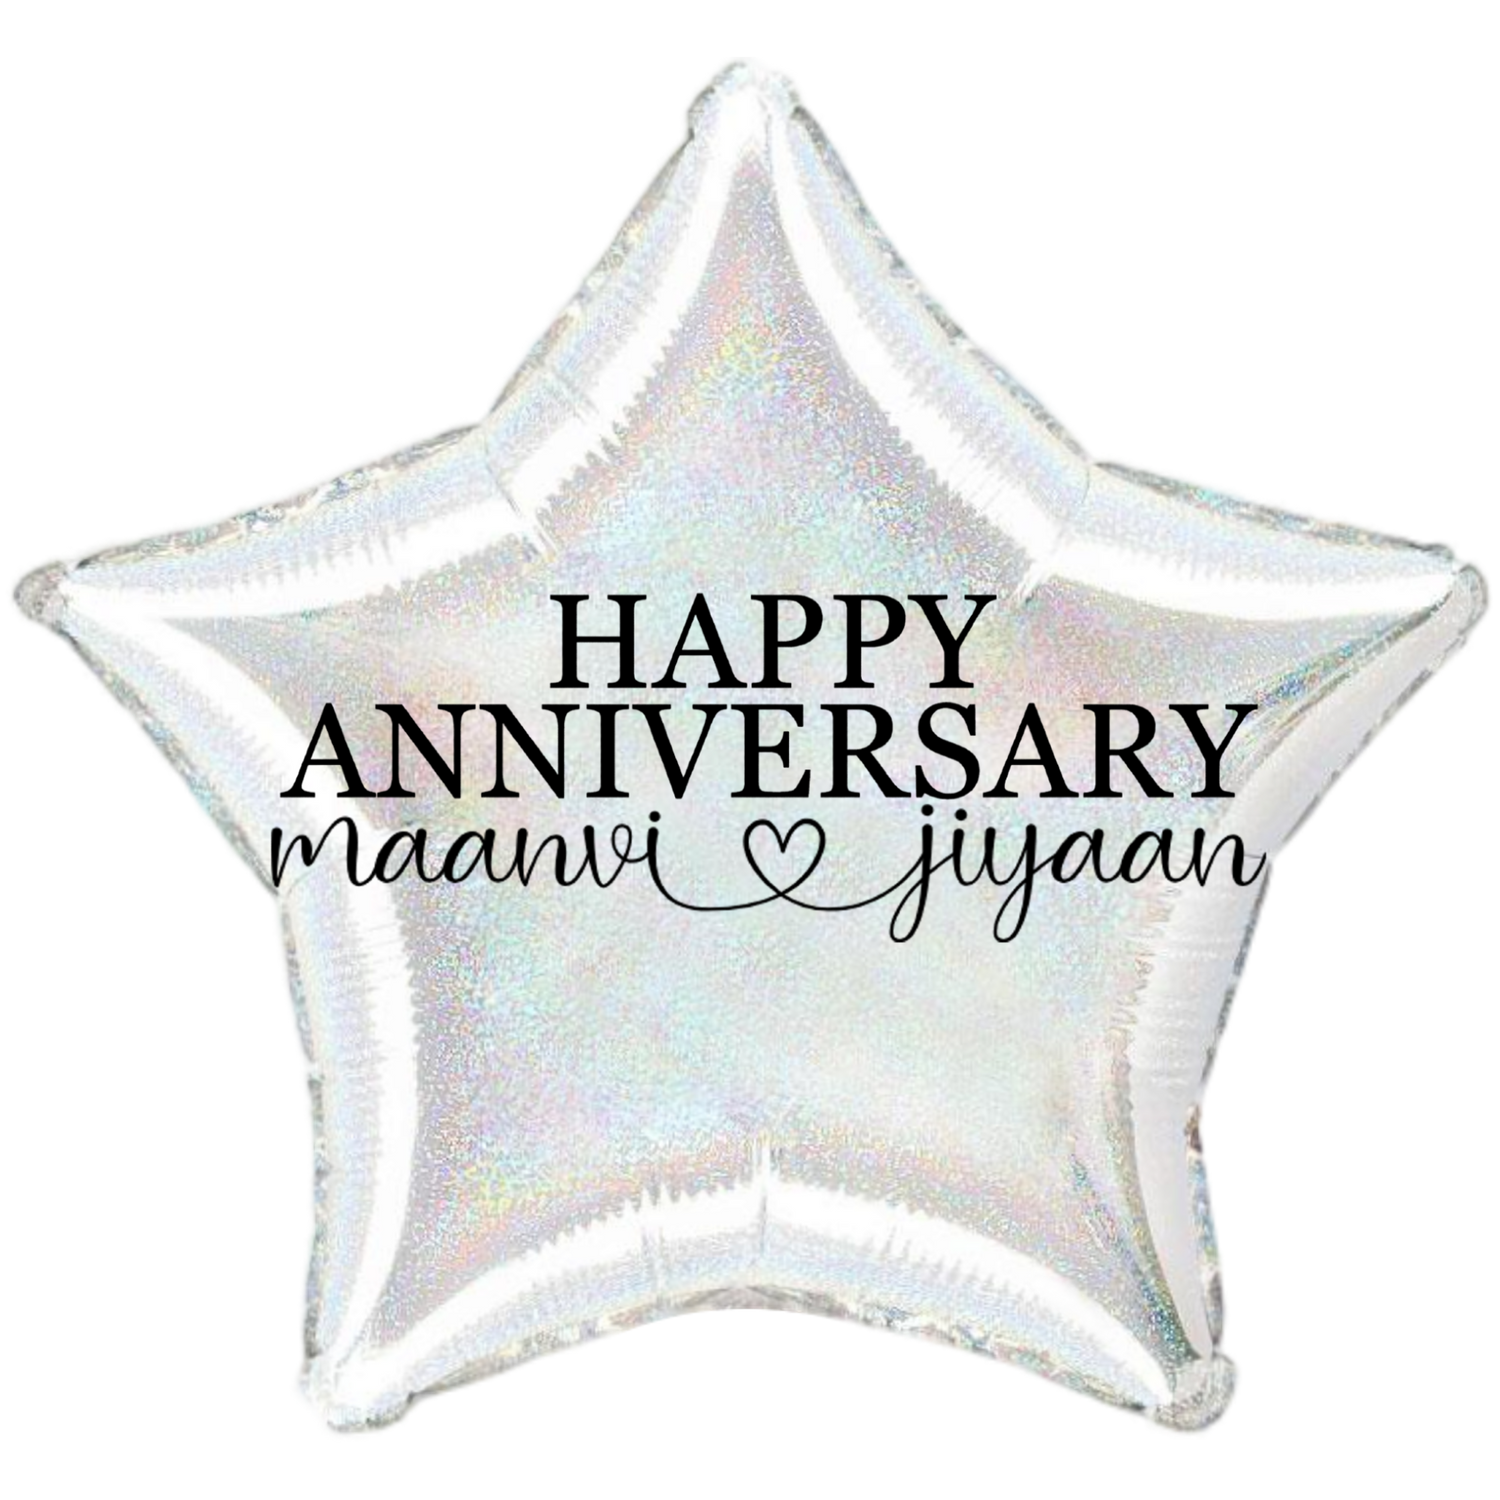 Custom Name/Text/Message Holographic Silver Star Balloons For First Wedding Anniversary, 2nd/3rd/5th/10th/15th/20th/25th/30th/35th/40th/45th/50th/55th/60th/65th/75th Marriage Anniversary And Wedding Milestones. Supports Helium/Air, Luxury Bespoke Balloons Make Perfect Decoration Supplies & Surprise For Your Husband/Wife/Partner/Other-Half.